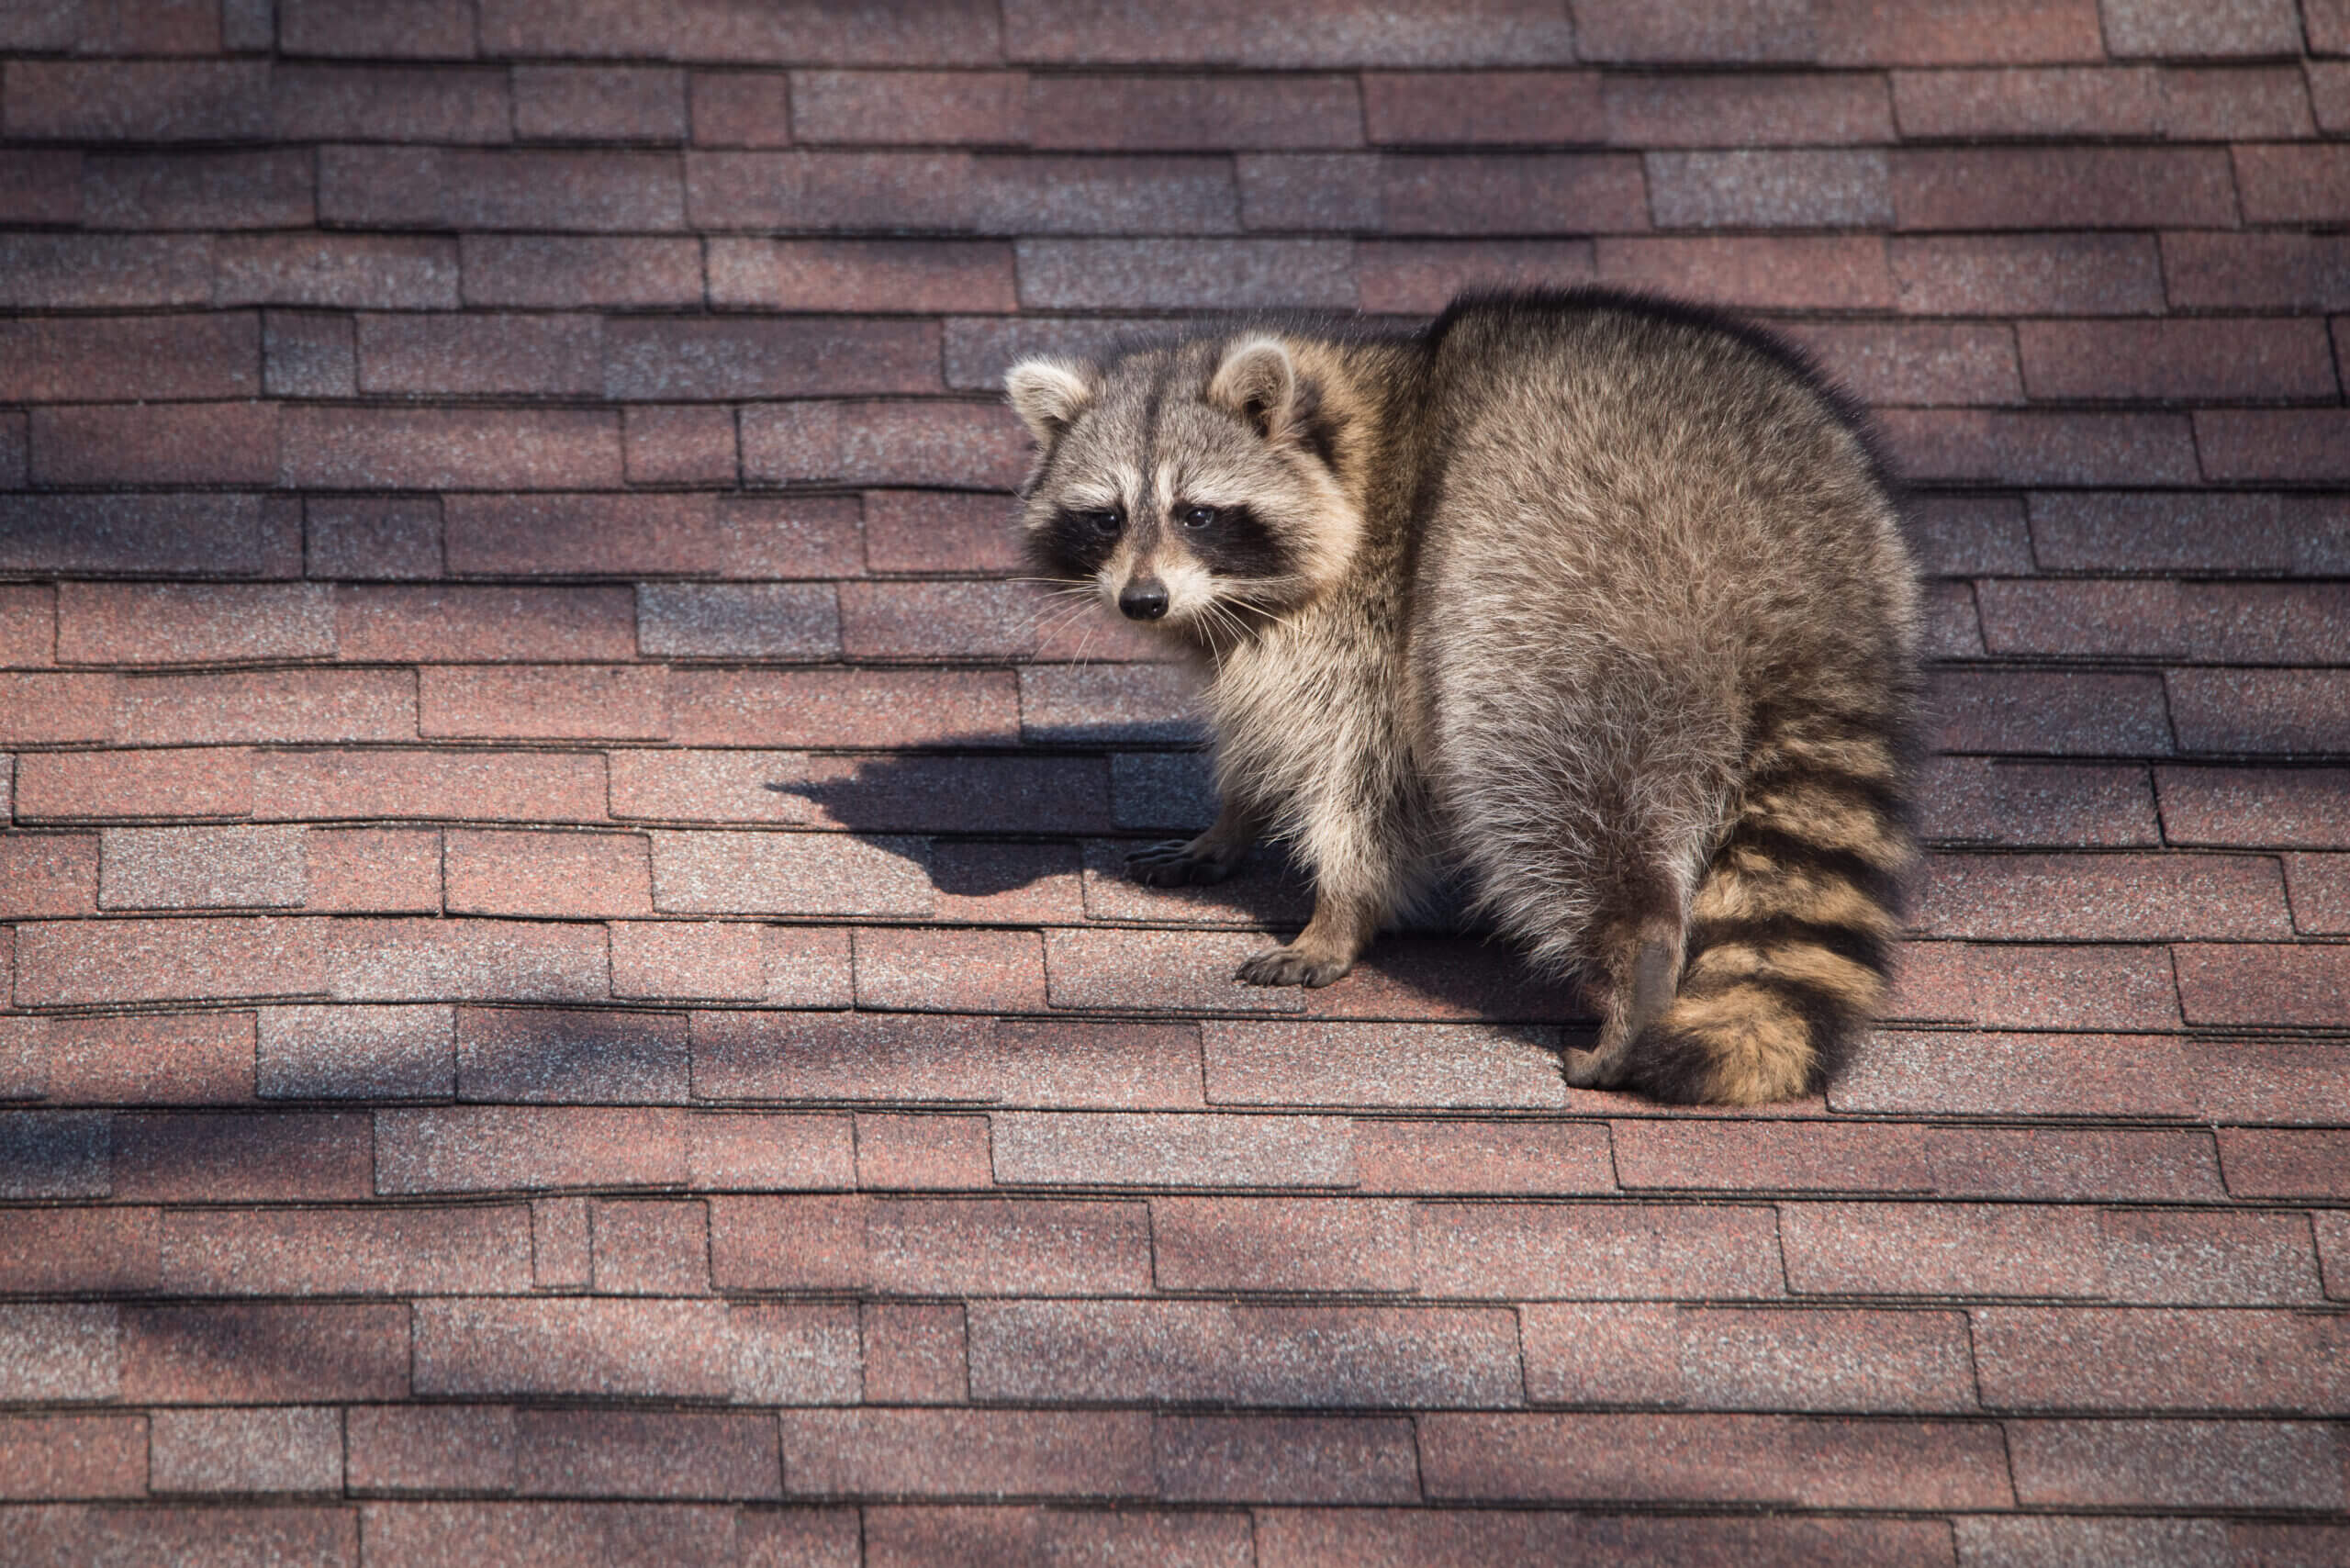 Racoon on a rooftop